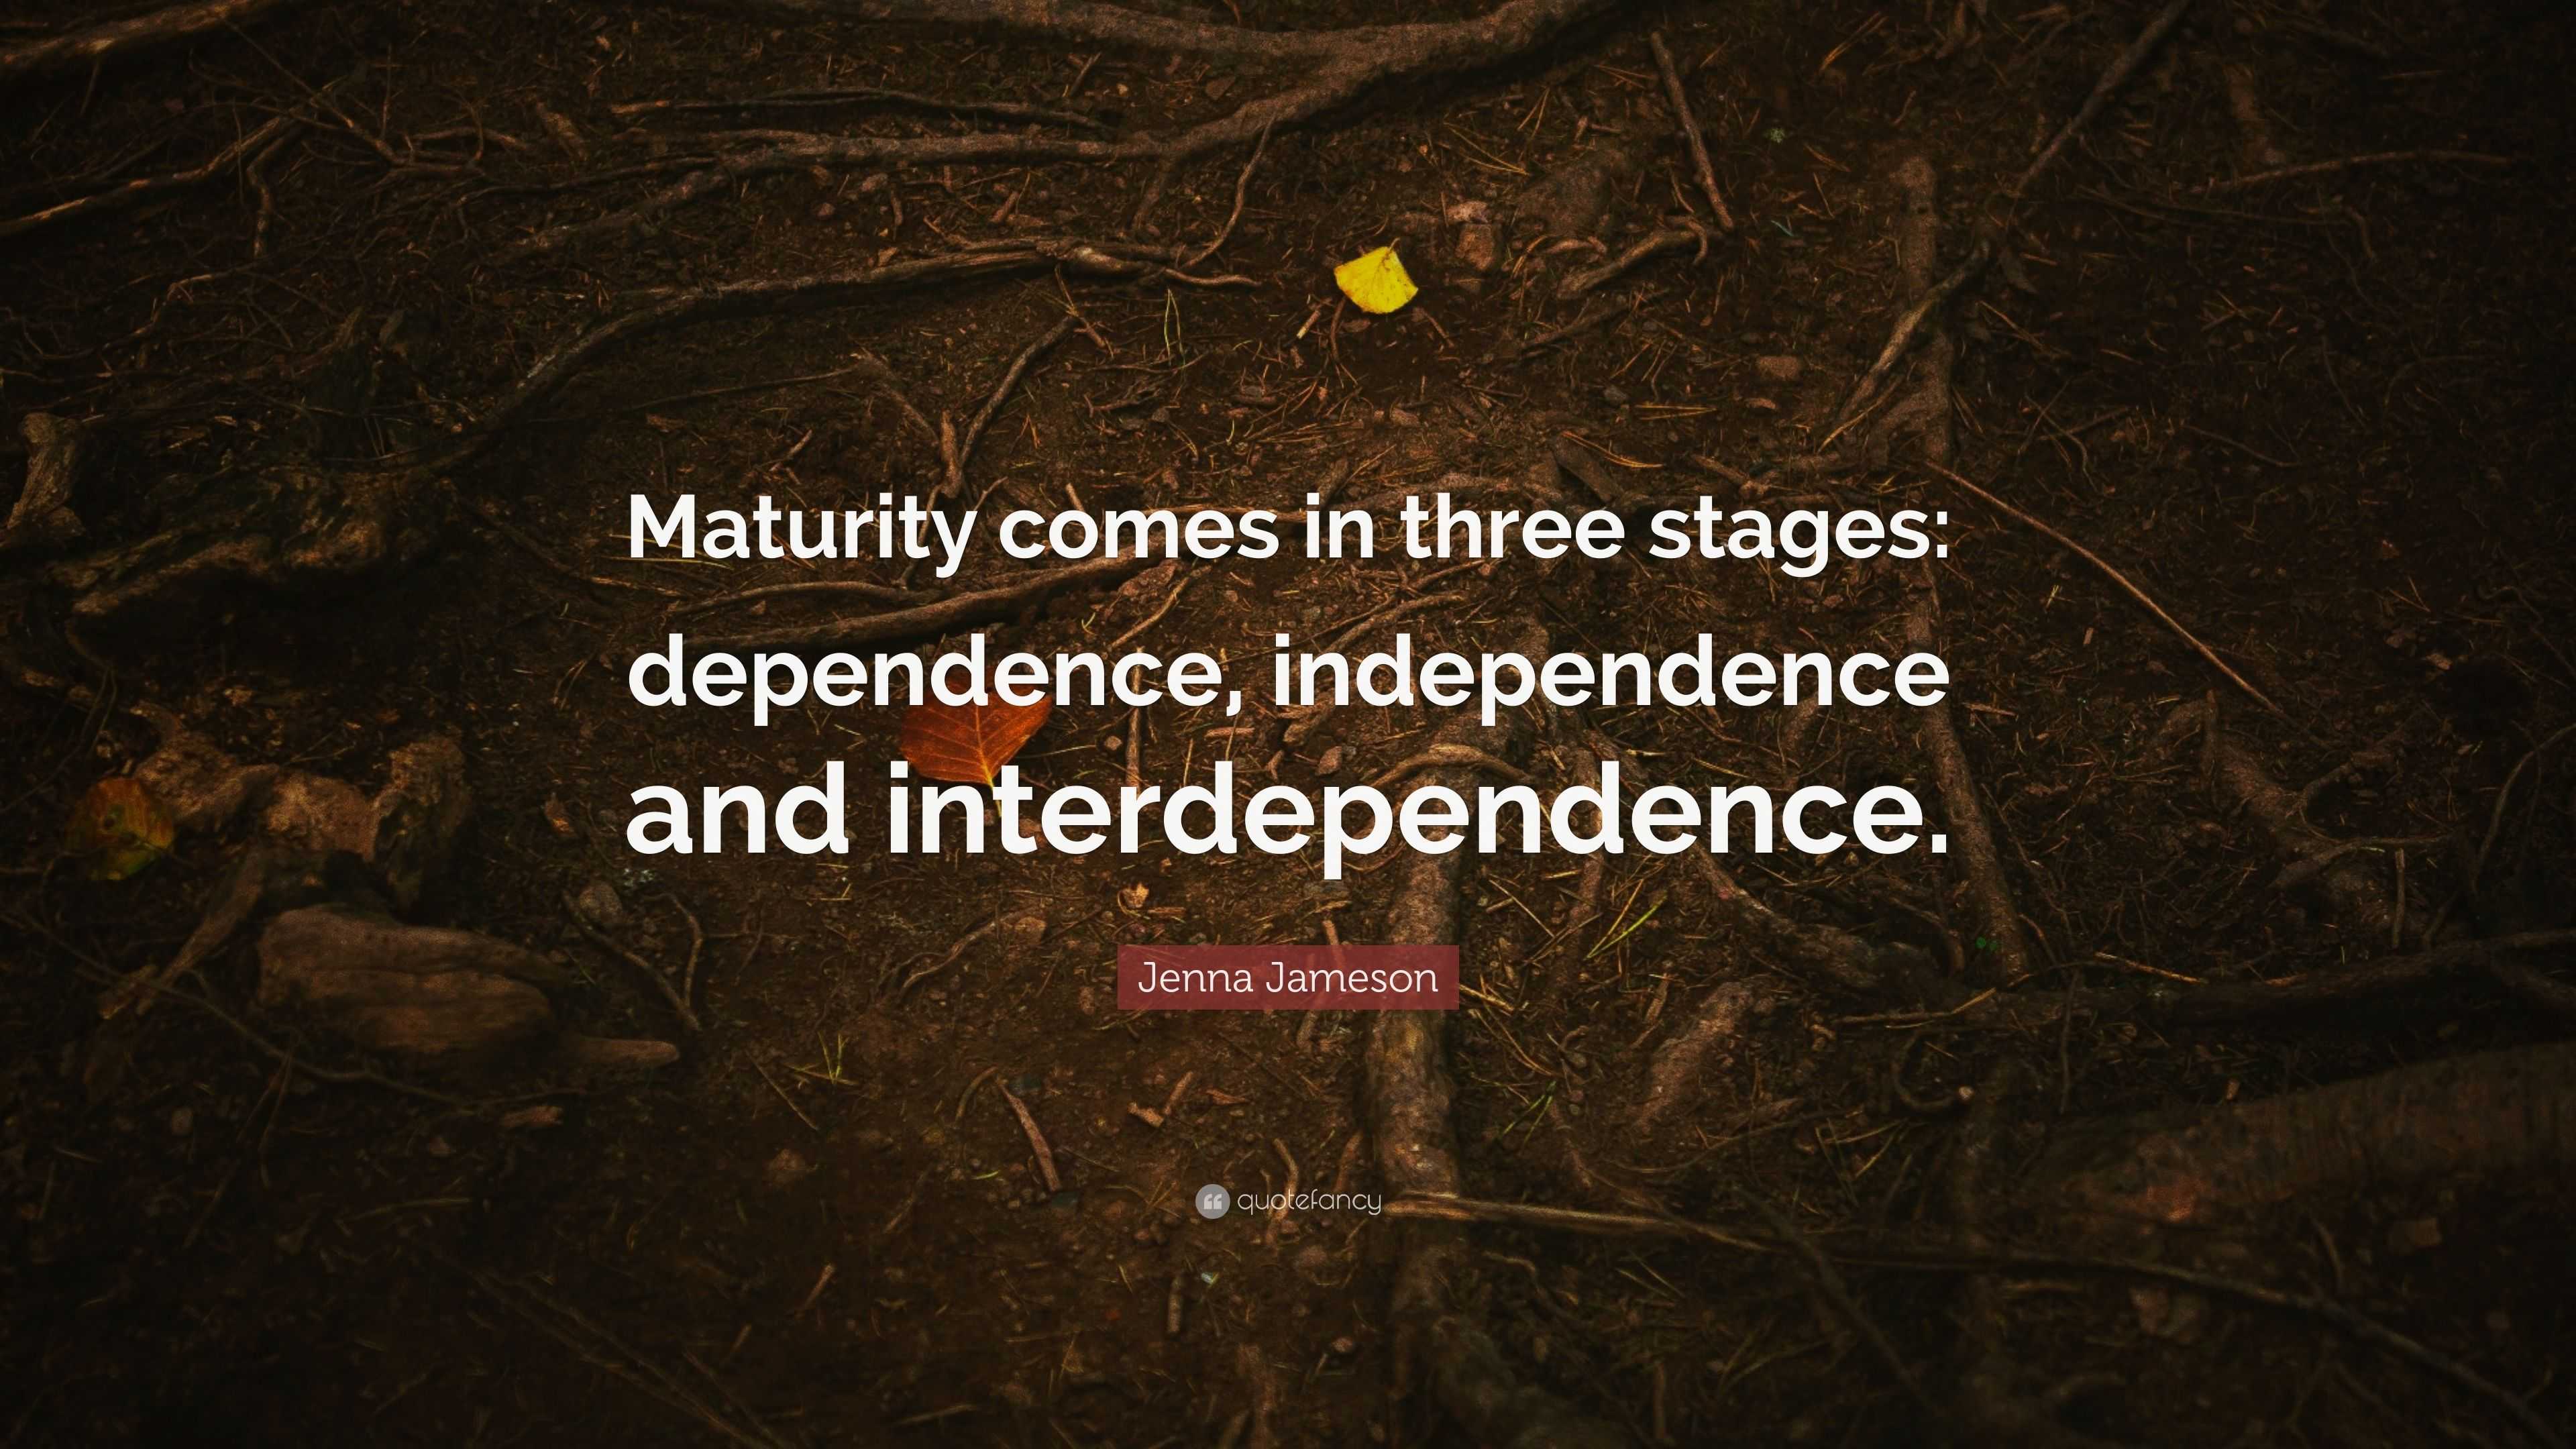 Jenna Jameson Quote: “Maturity comes in three stages: dependence